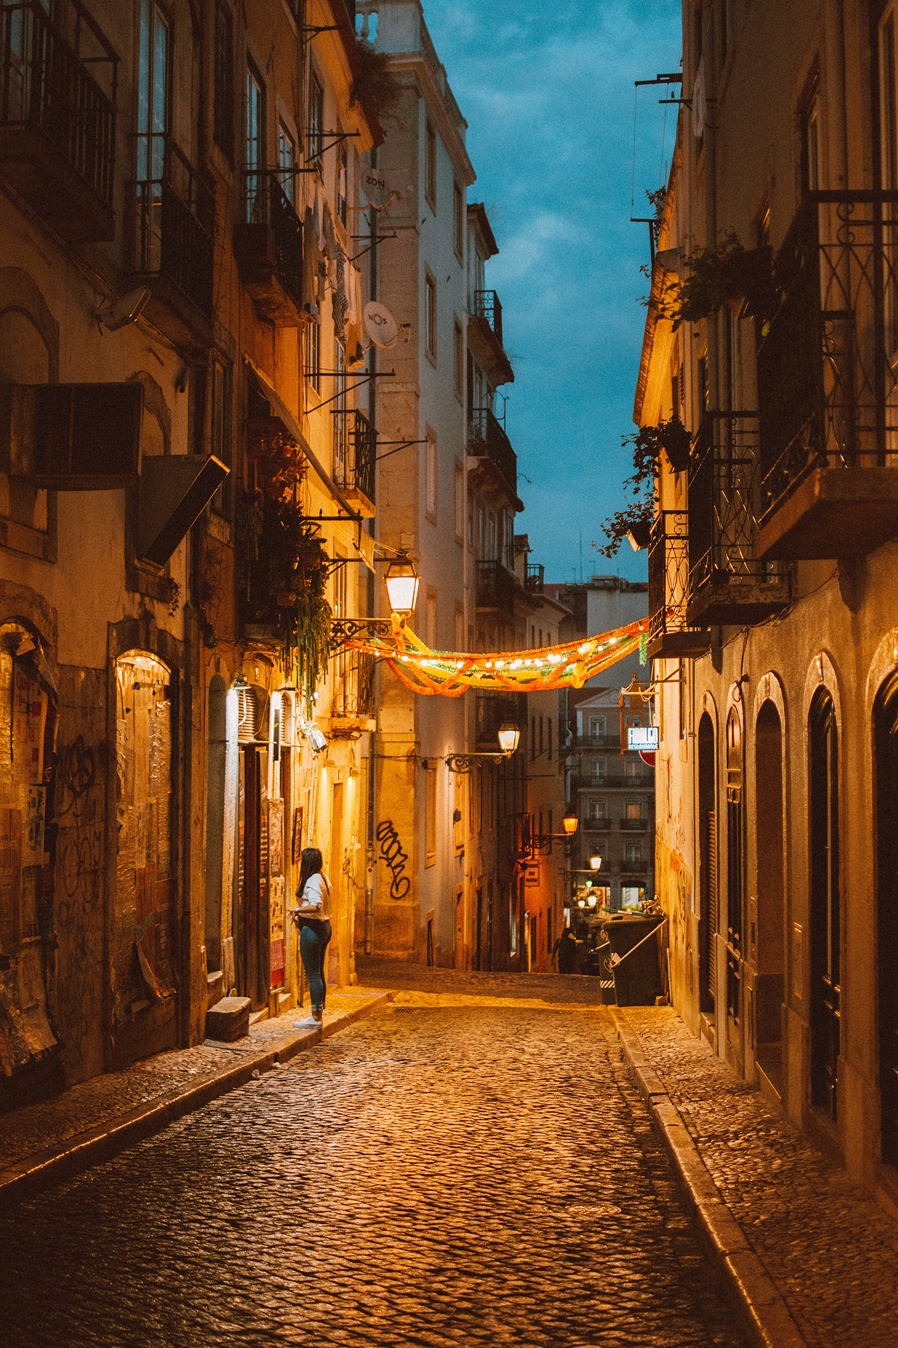 A photo of a Portuguese city alley way light up at dusk